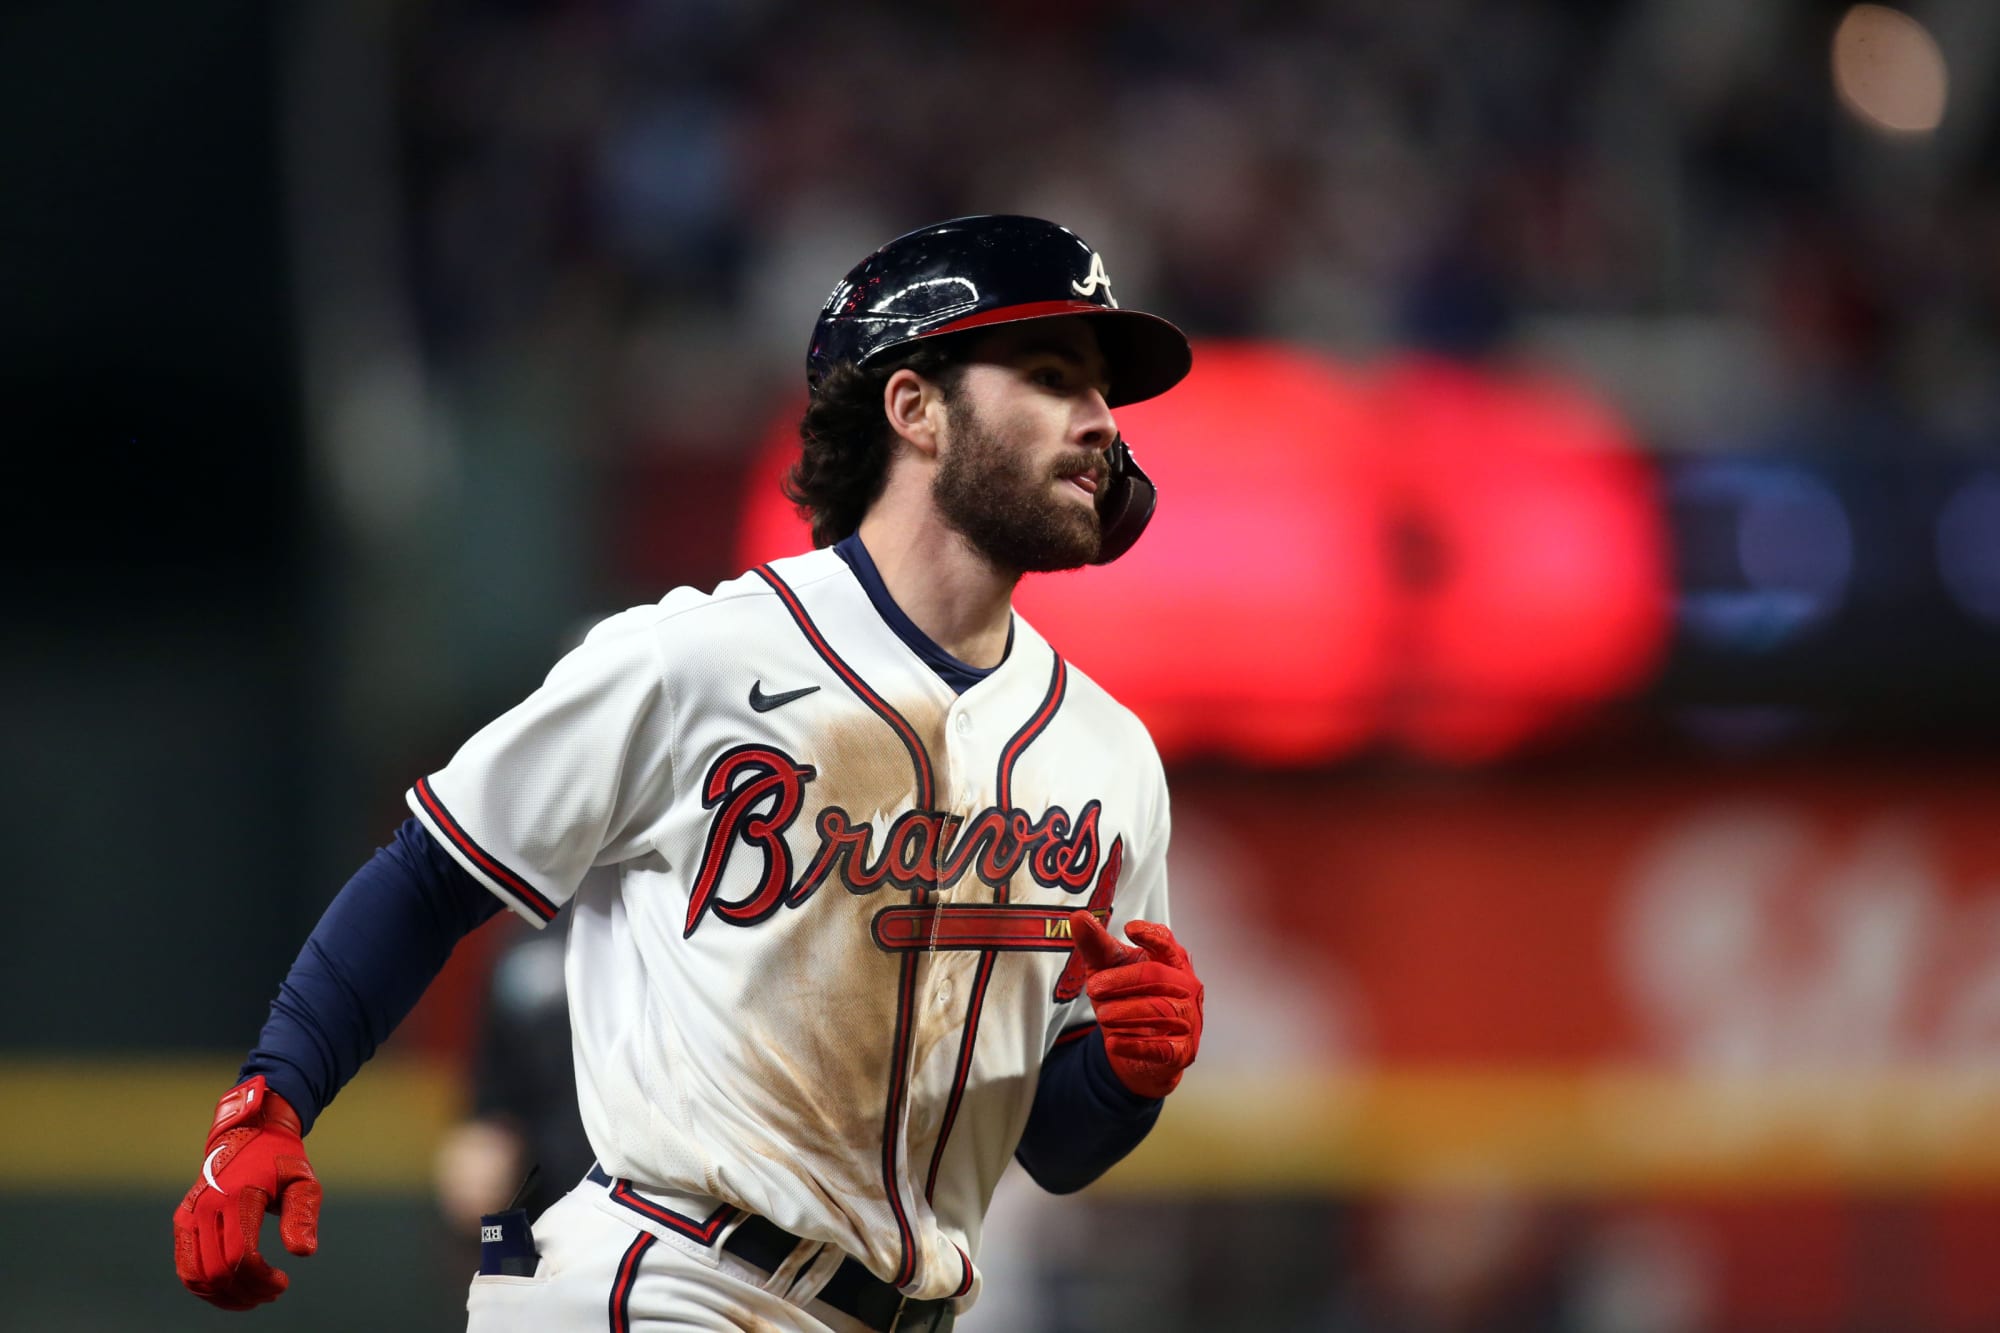 Surprise teams that could steal Dansby Swanson from Braves